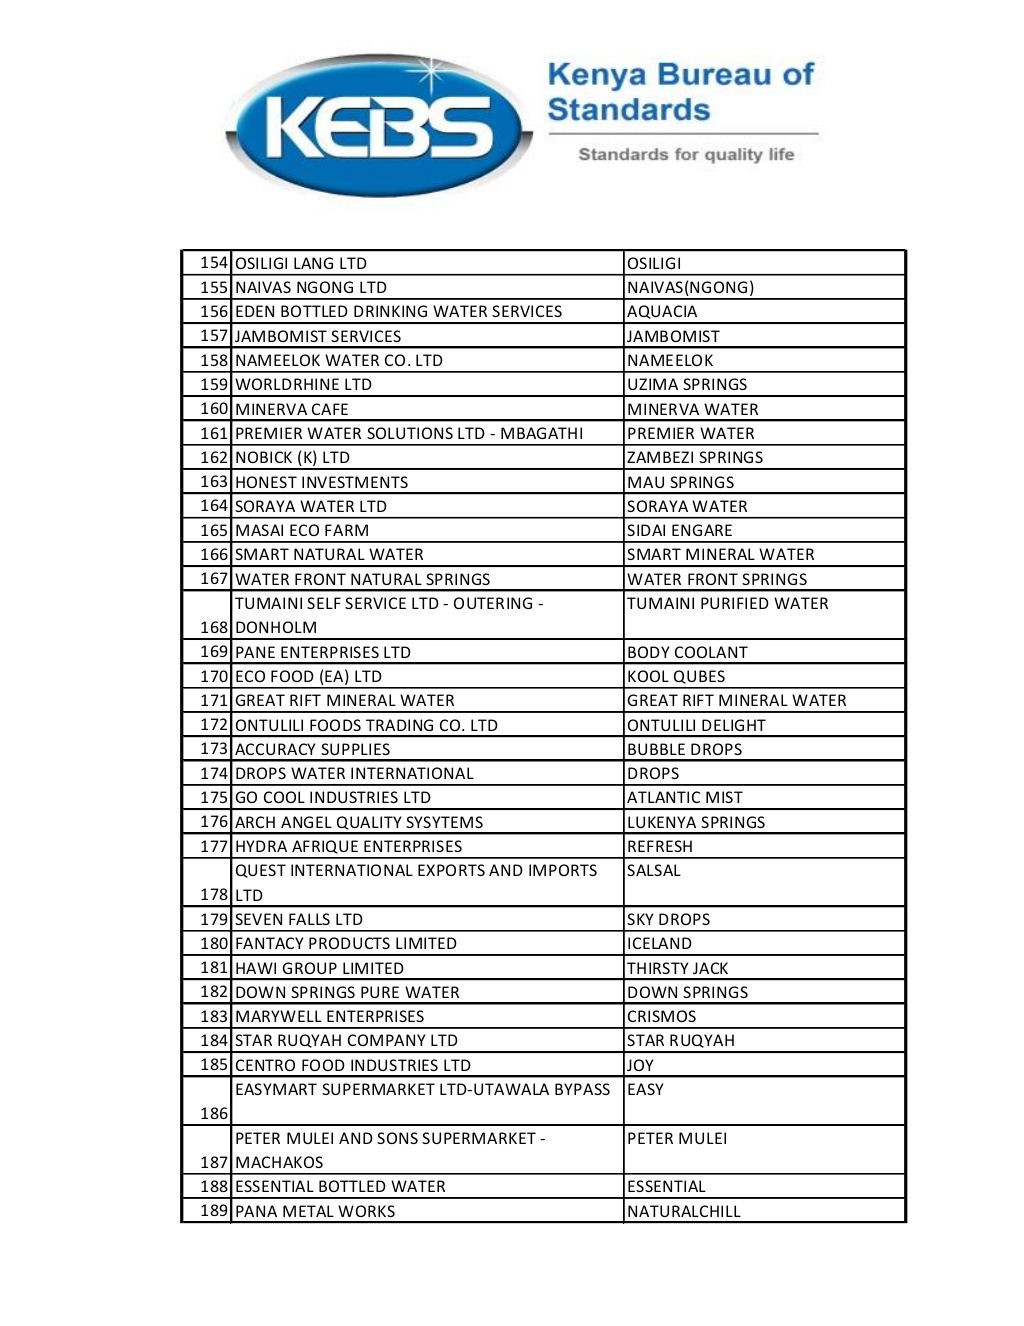 list-of-368-water-brands-banned-by-kebs-5-1024